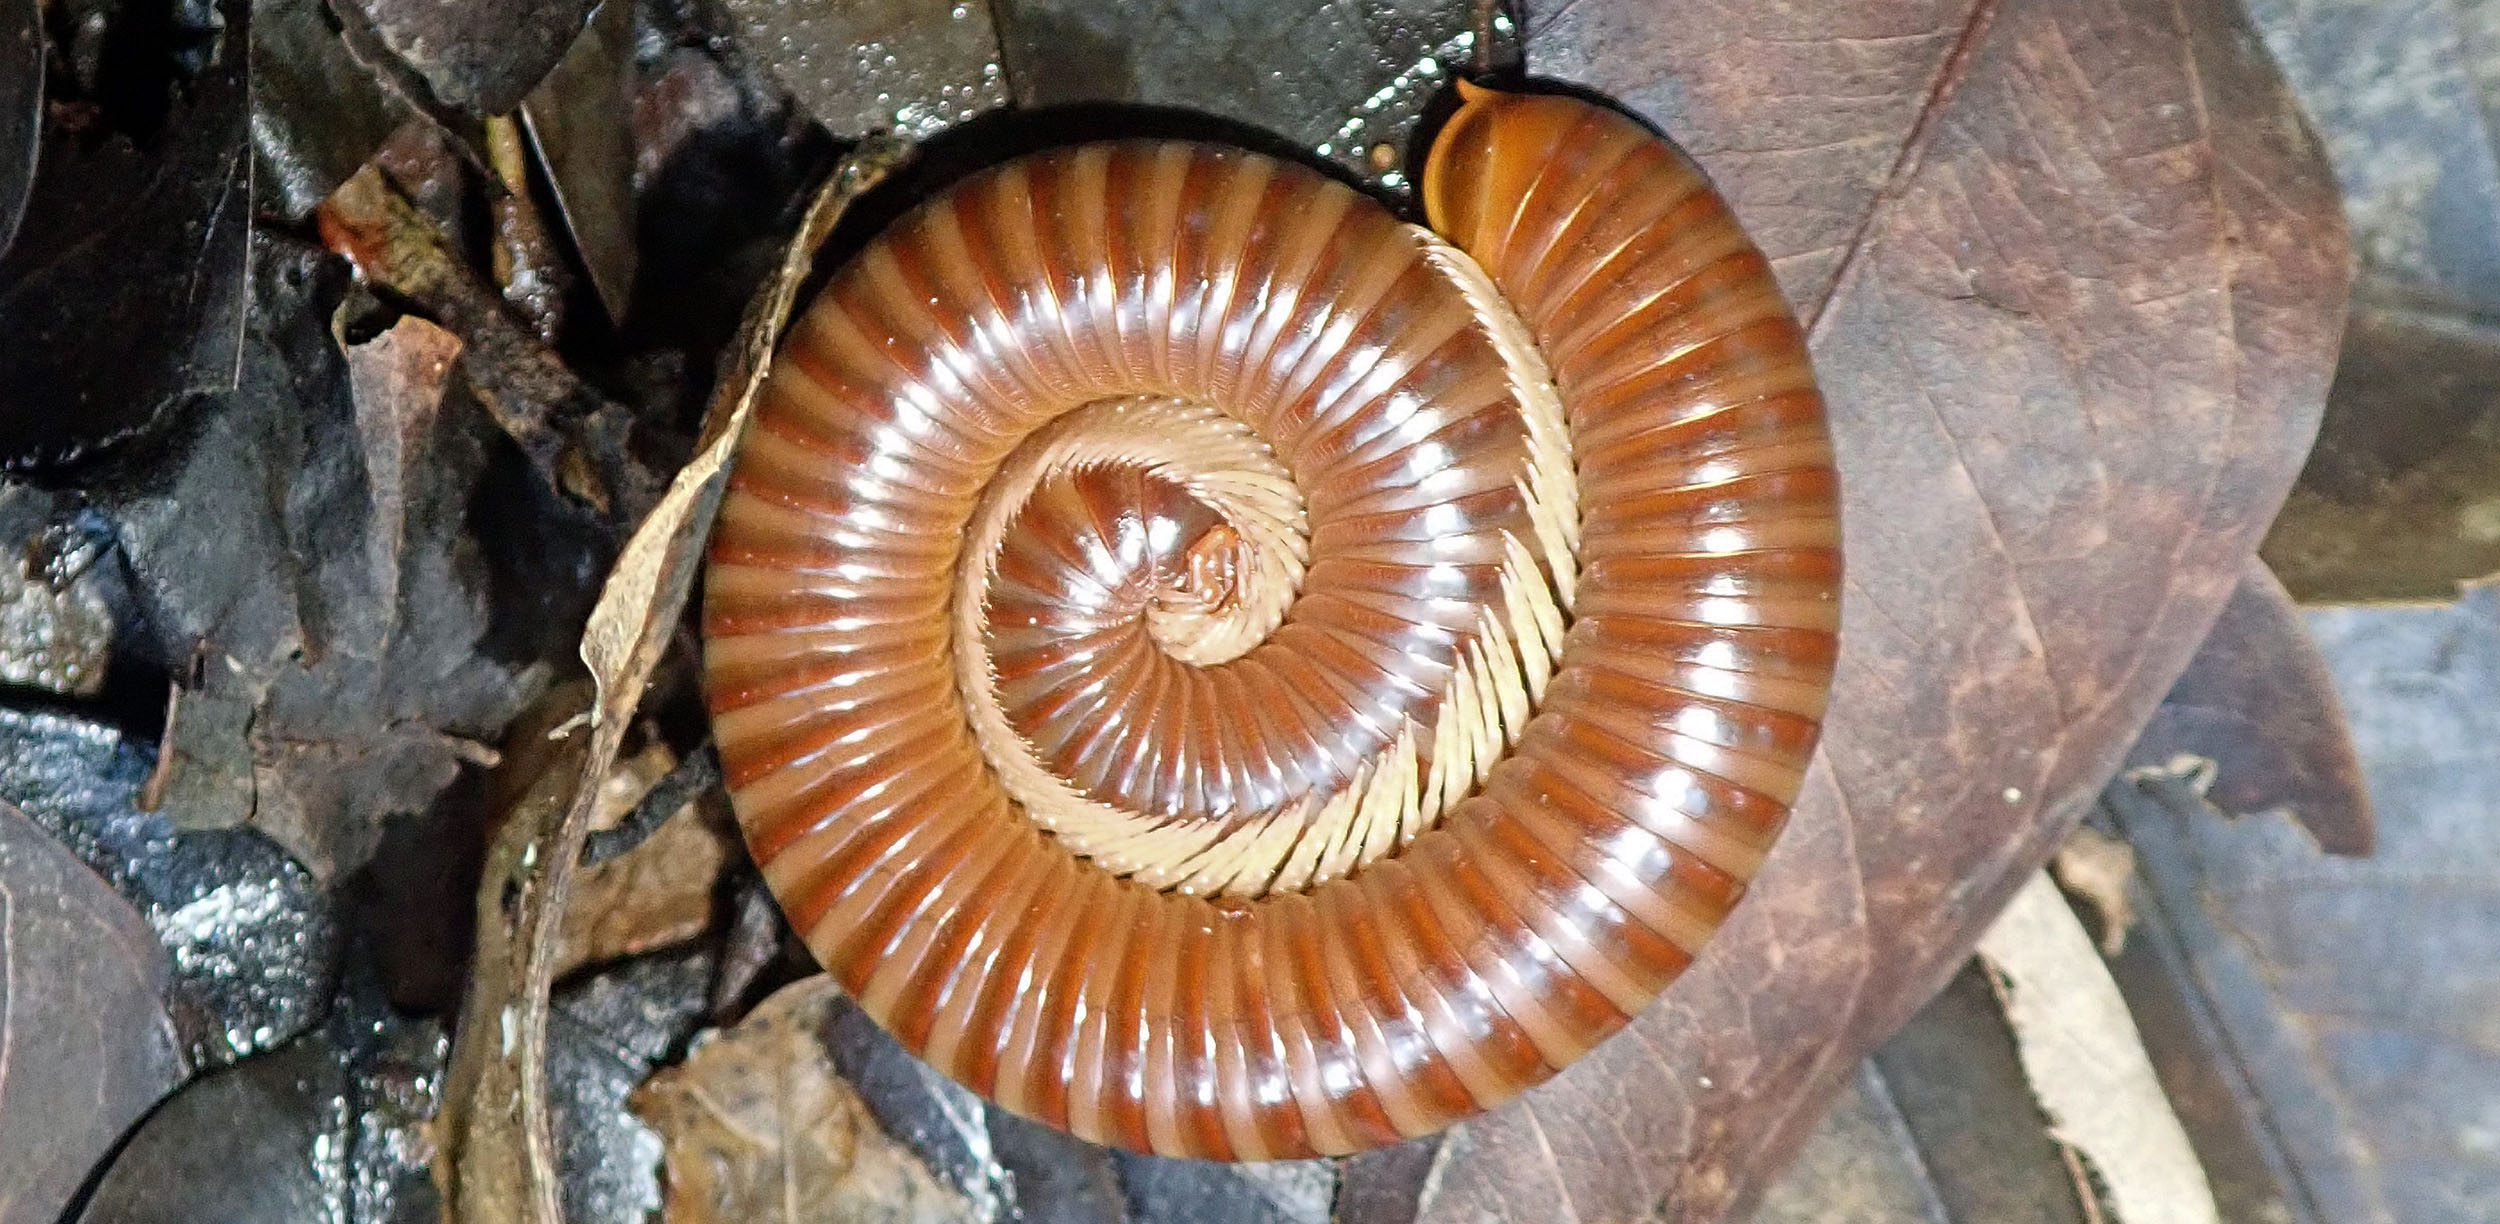 millipede-rolled-up-jahoo-cambodia